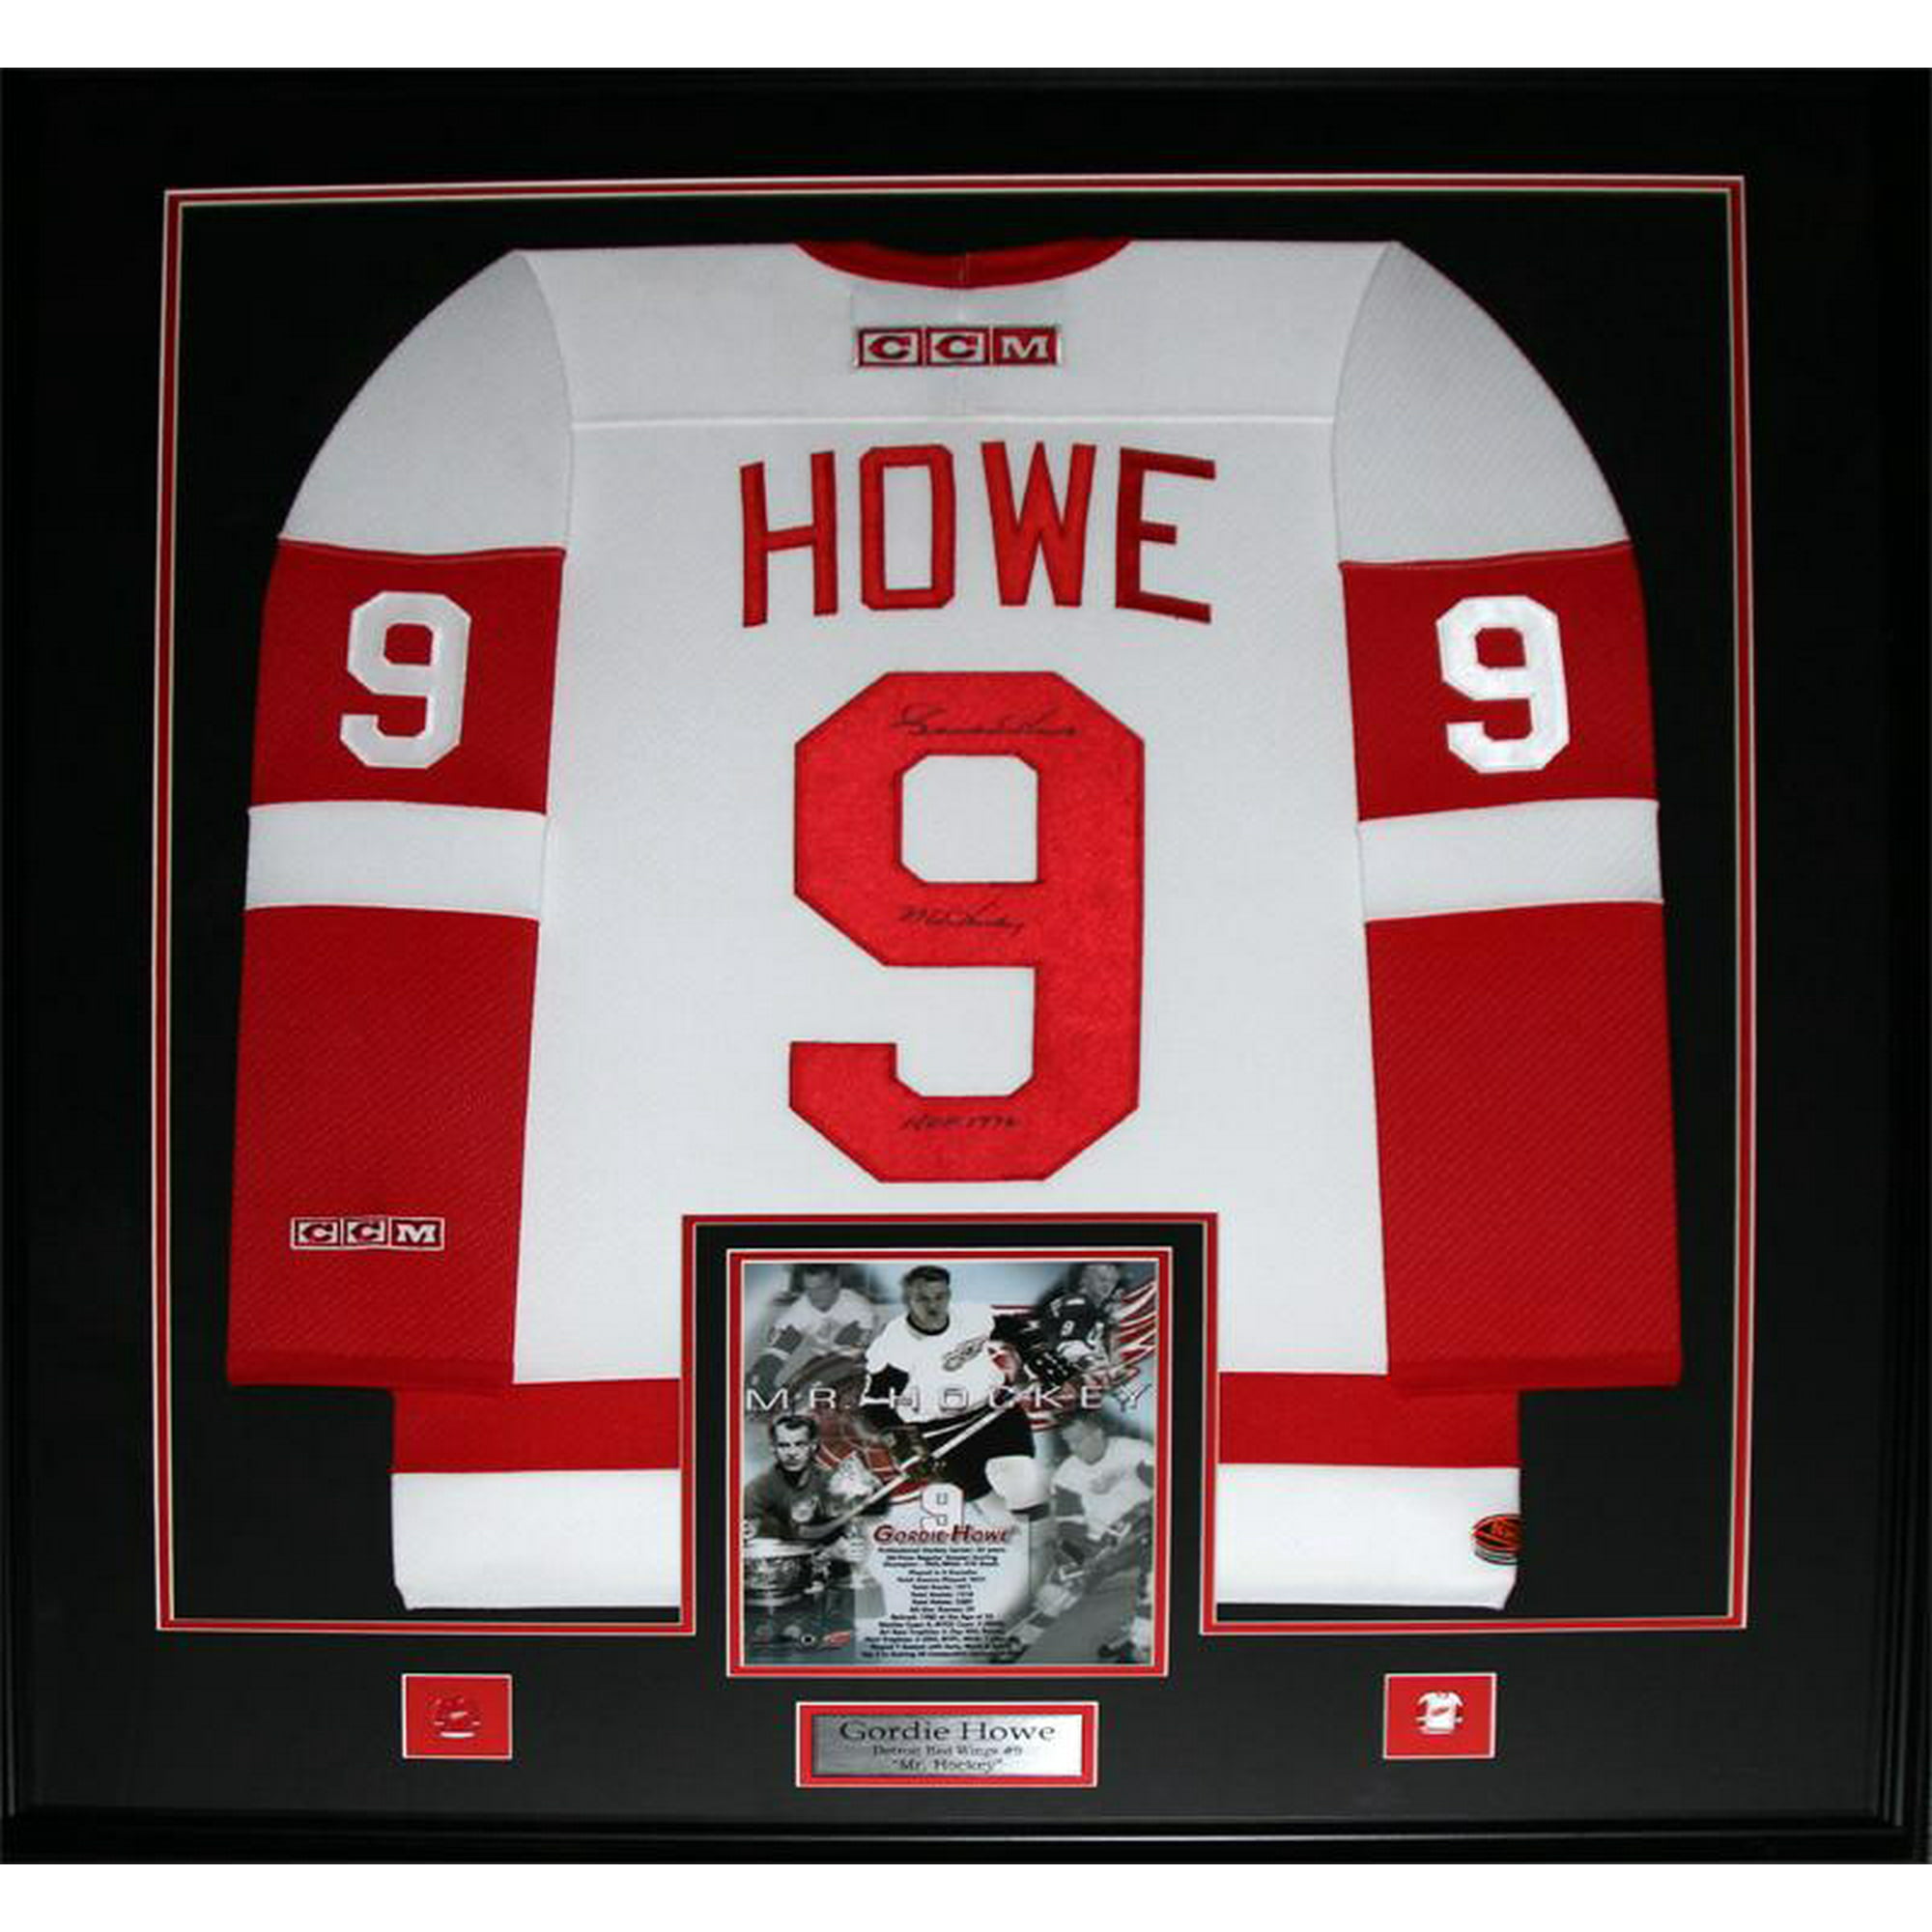  NHL Gordie Howe Detroit Red Wings Career Stat Plaque : Sports  Fan Decorative Plaques : Sports & Outdoors